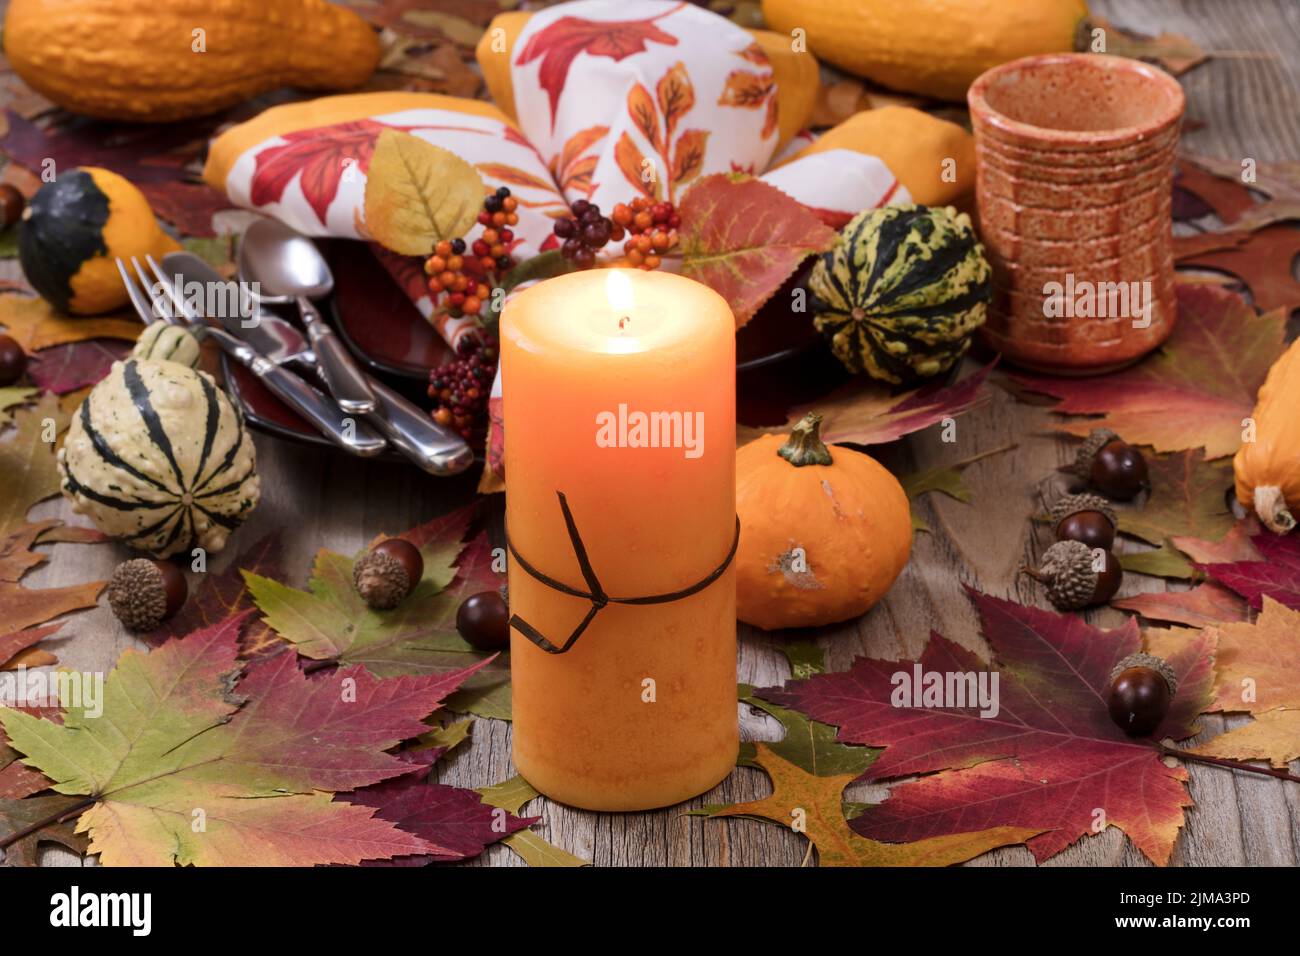 Holiday candle glowing for dinner setting for fall season with real gourd decorations and leaves Stock Photo